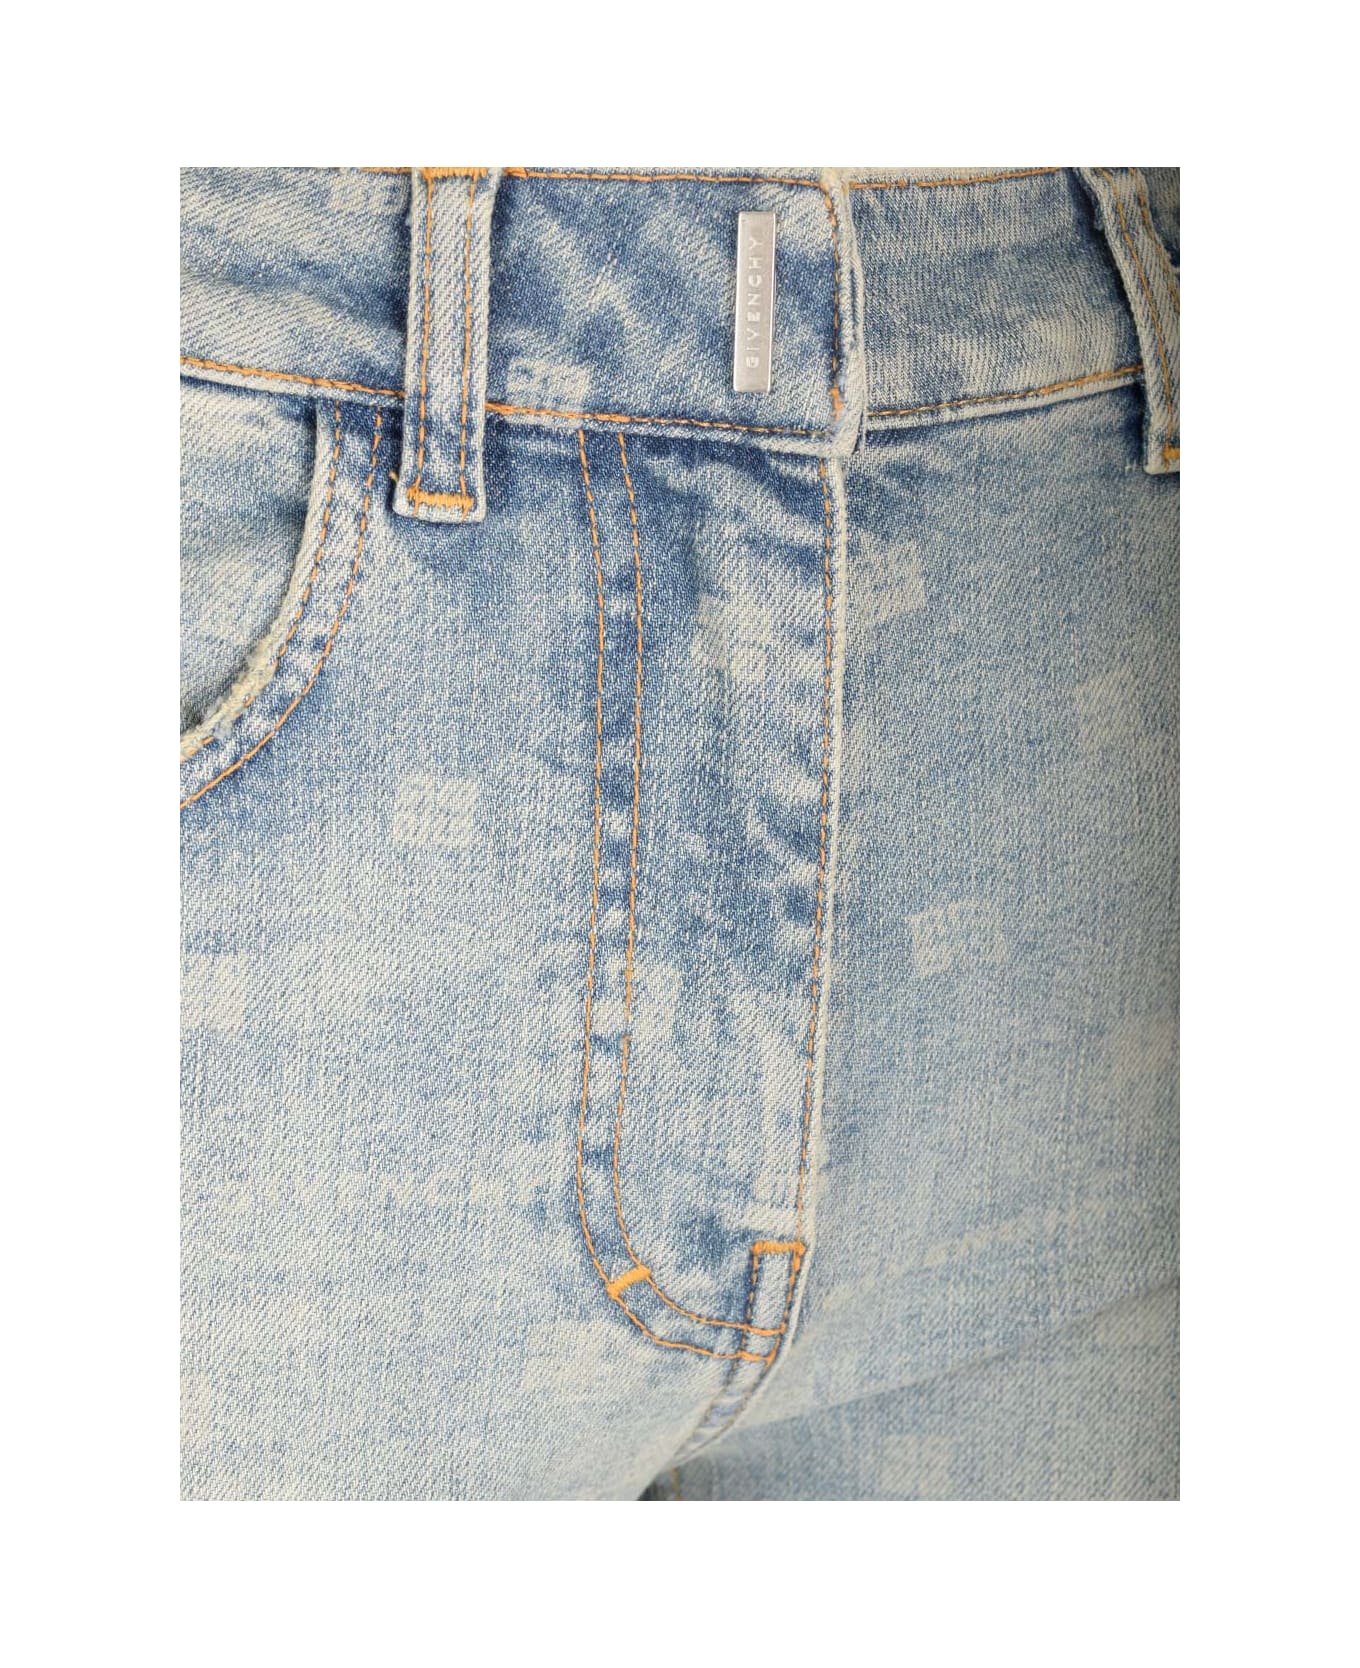 Givenchy Bootcut Jeans - Blue